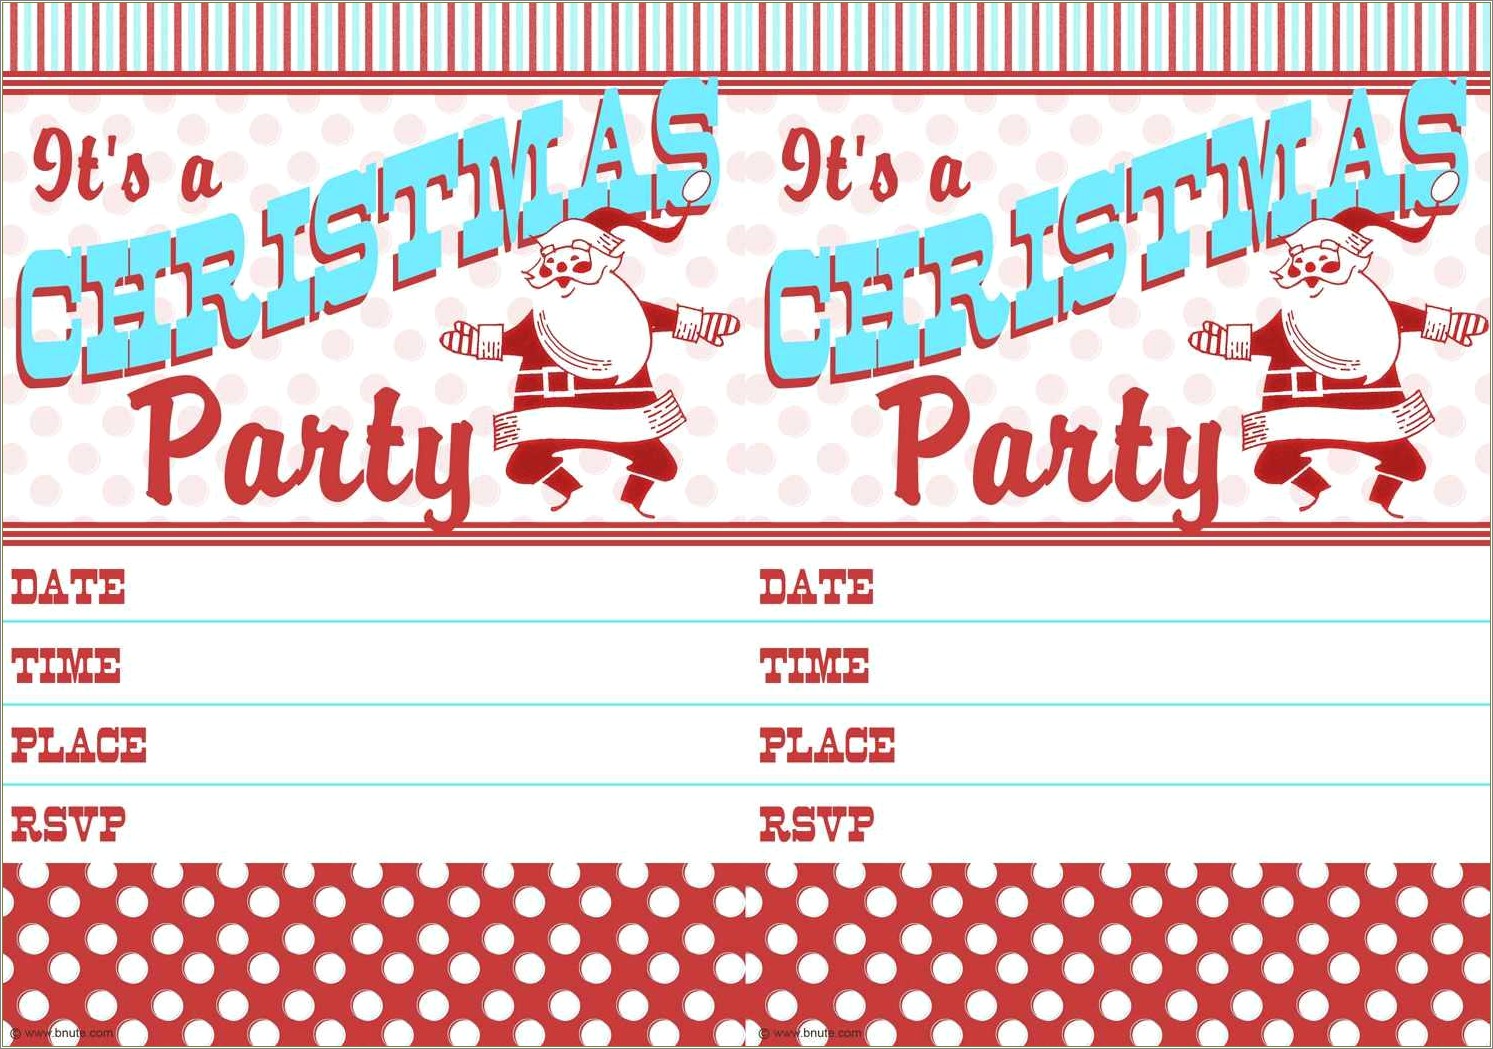 Free Downloadable Christmas Party Invitation Template